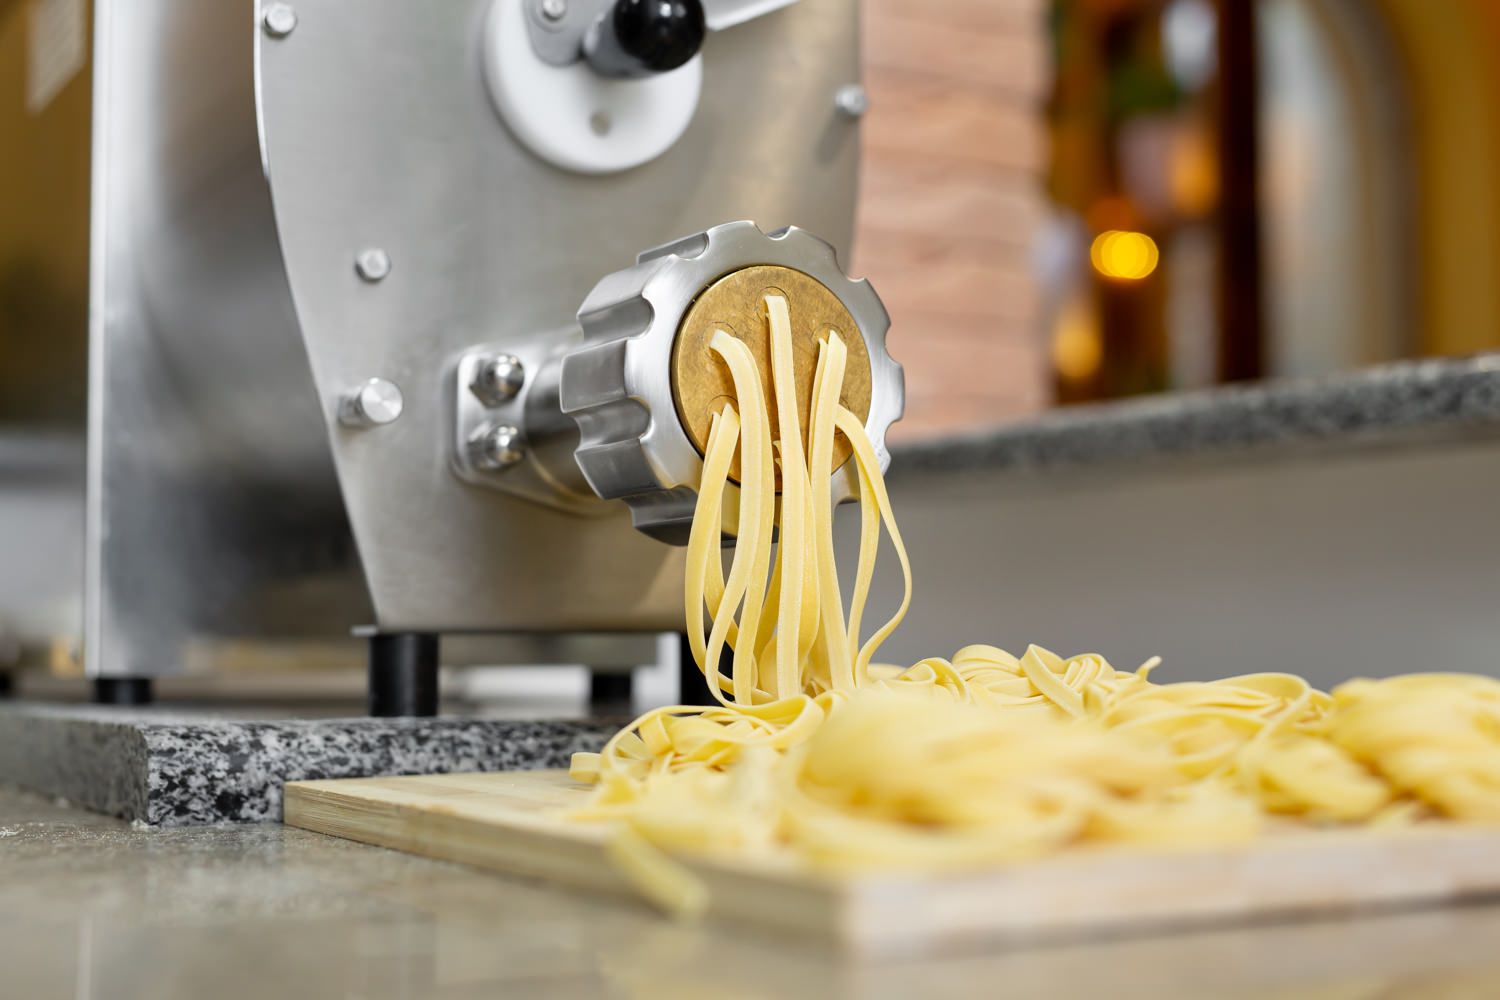 https://gsolutions.tv/wp-content/themes/yootheme/cache/49/chef-cooks-italian-spaghetti-using-a-pasta-machine-491d25ee.jpeg